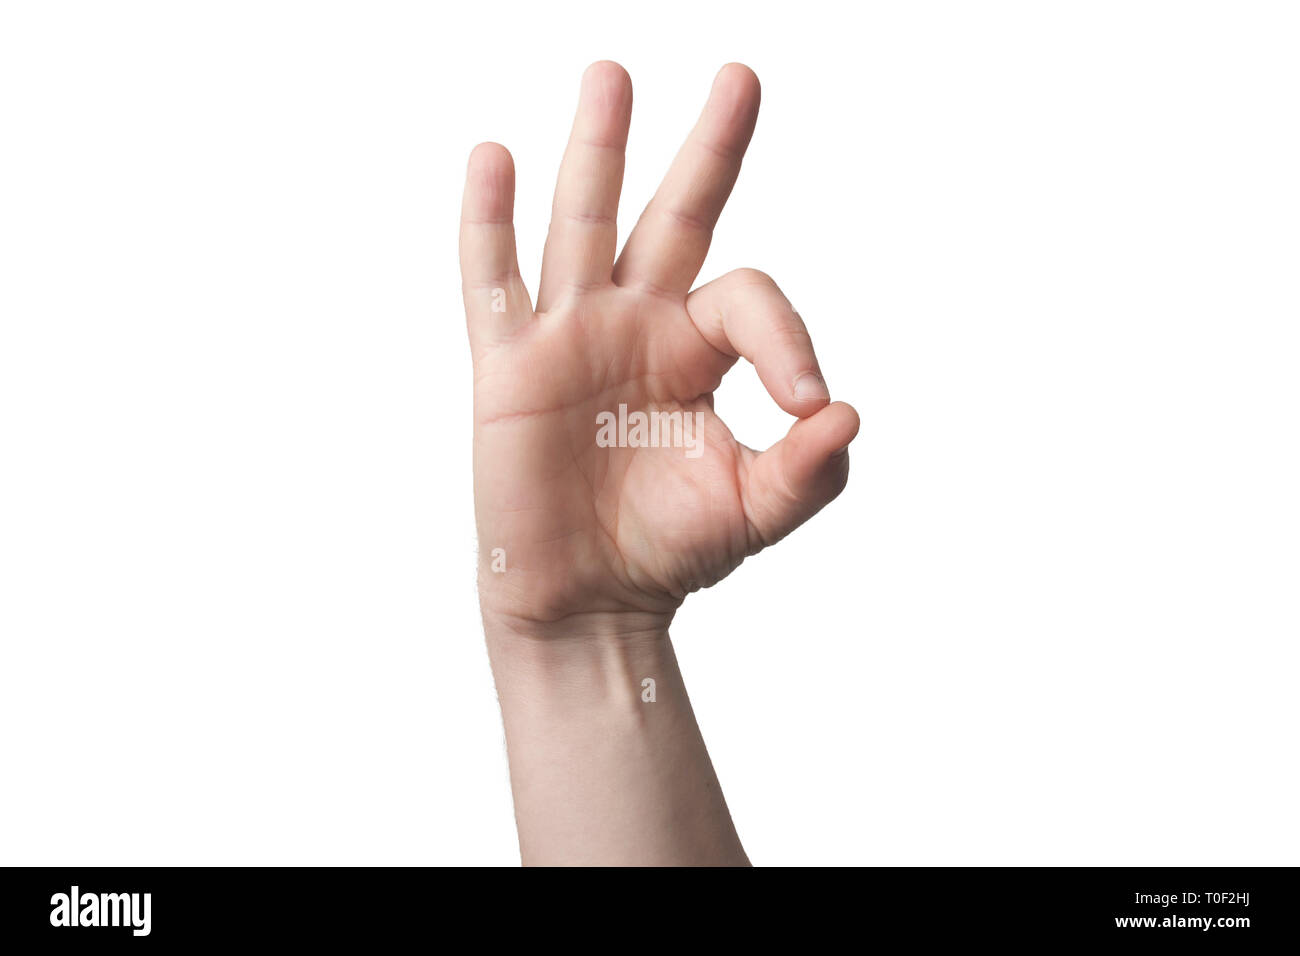 Hand mimic ok gesture (ring gesture) isolated on white background Stock Photo